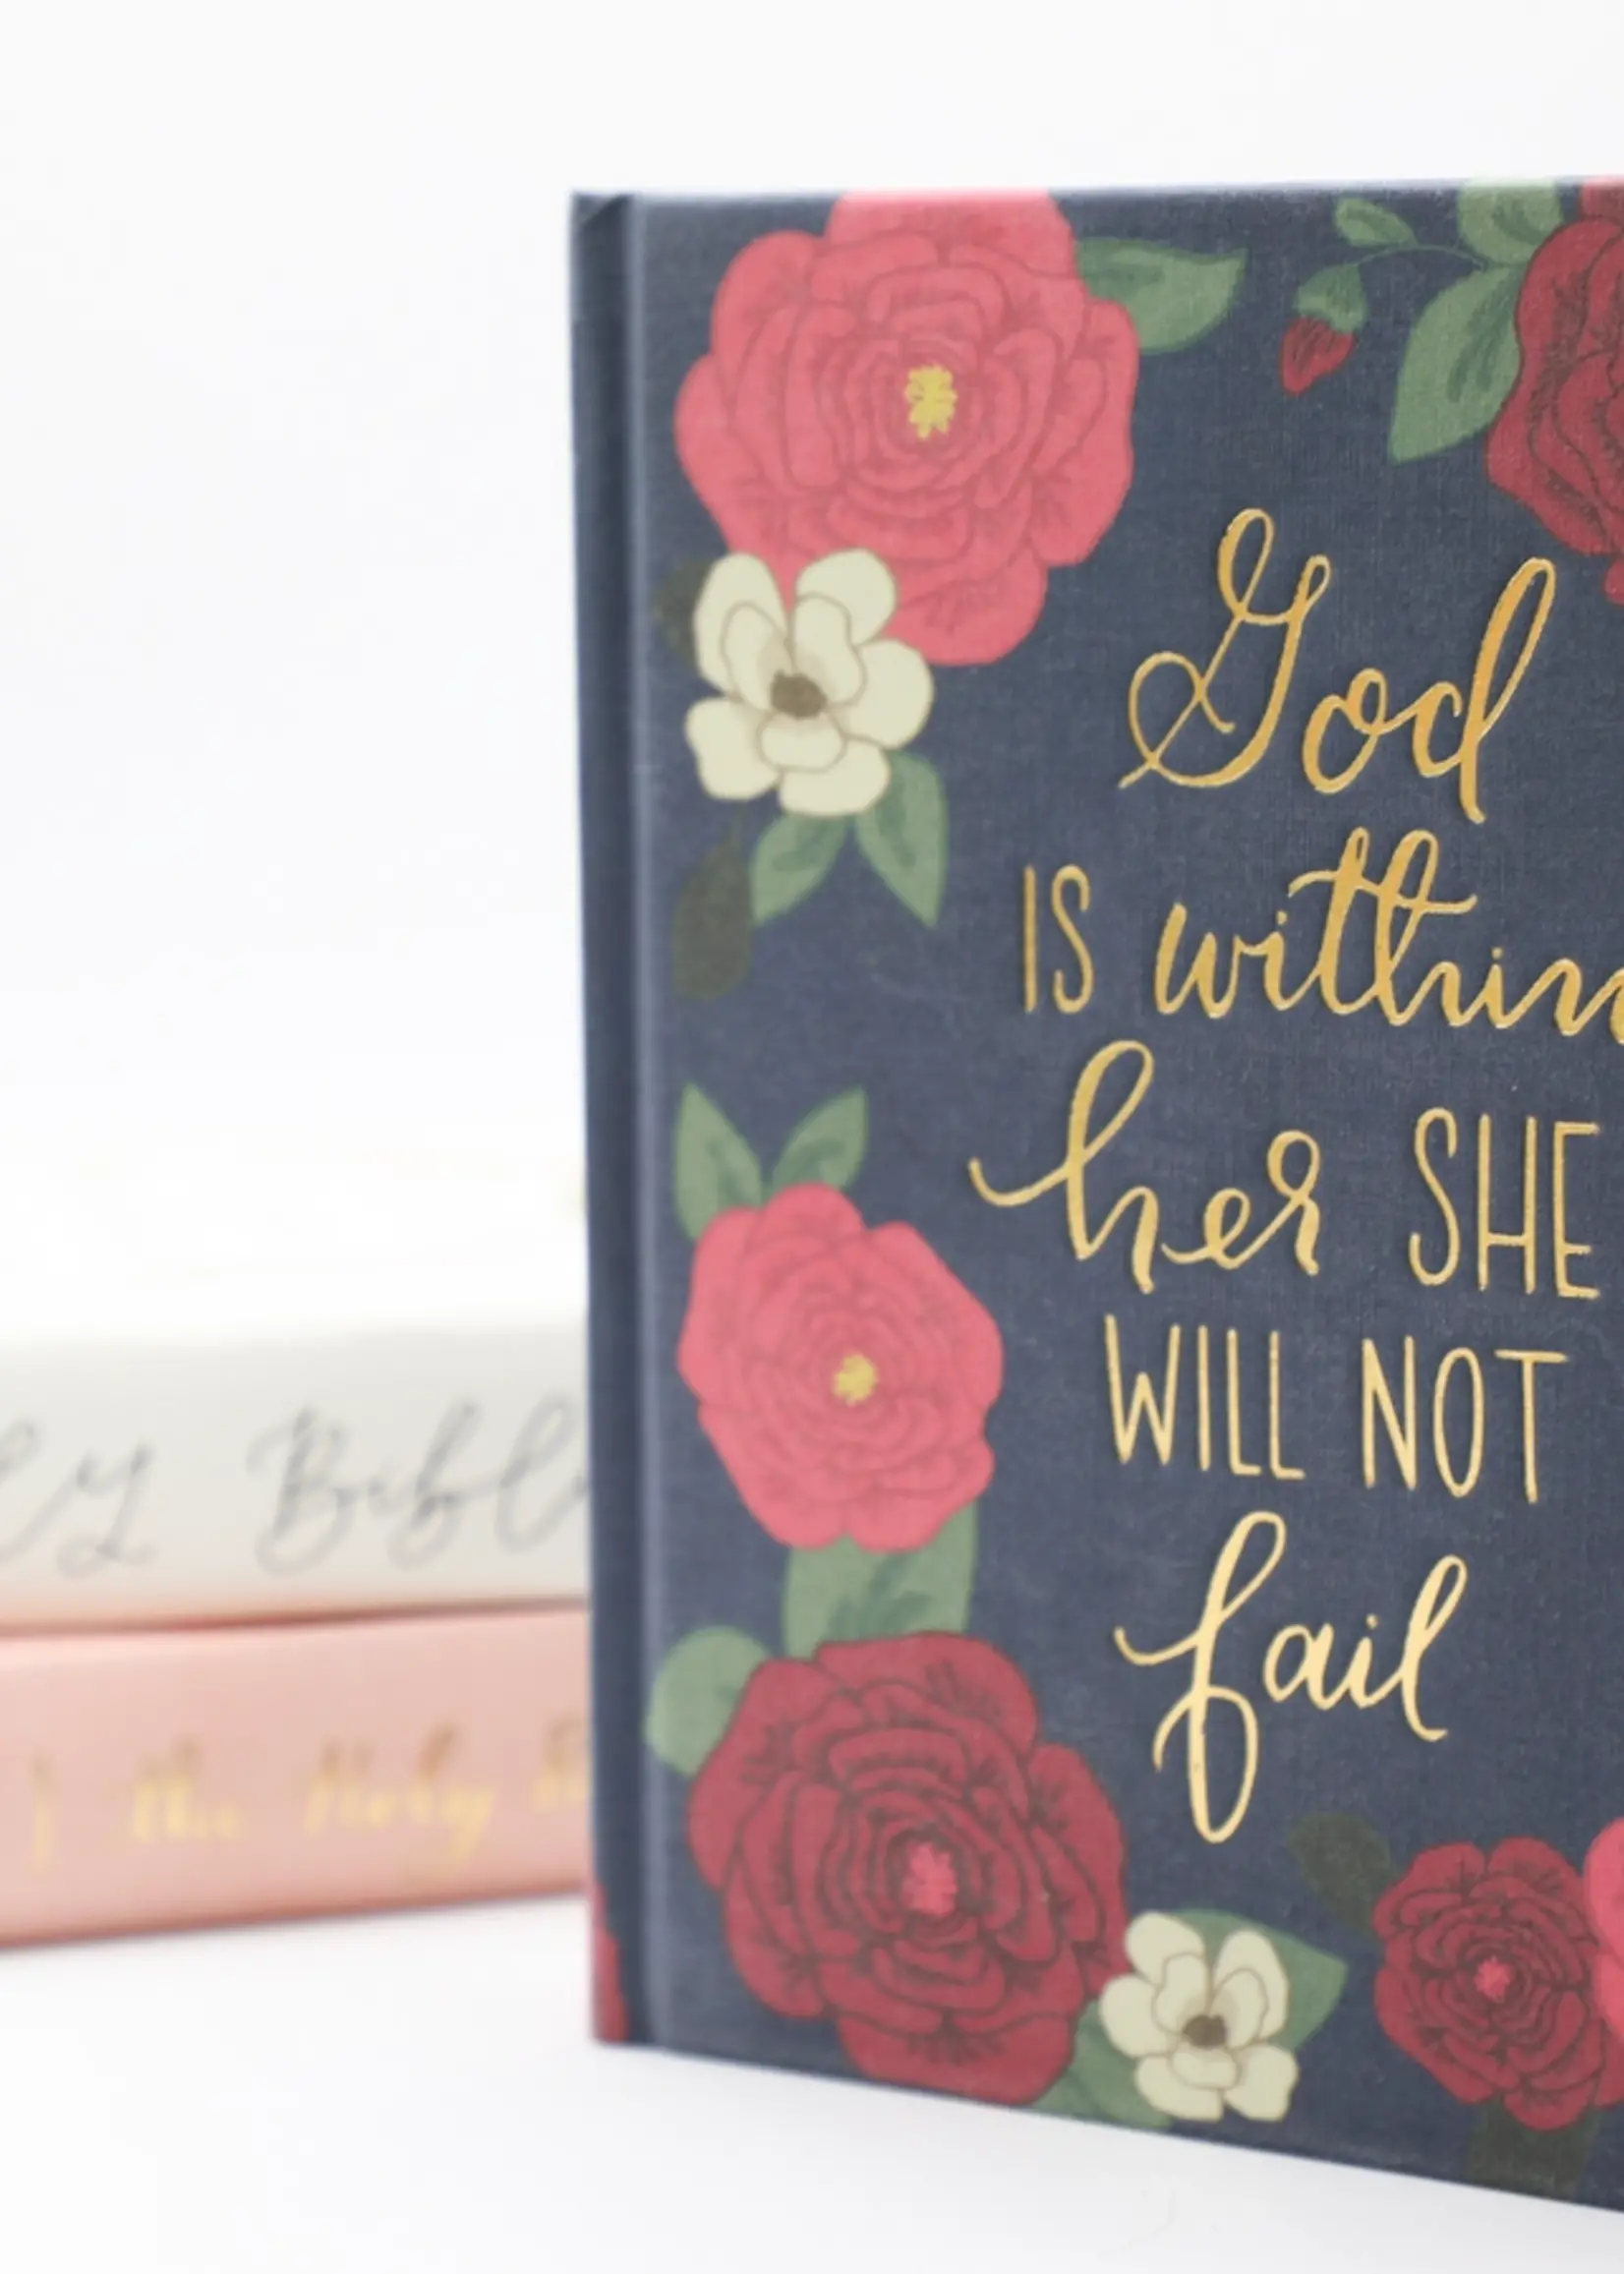 WHEAT & HONEY CO GOD IS WITHIN HER JOURNALING BIBLE